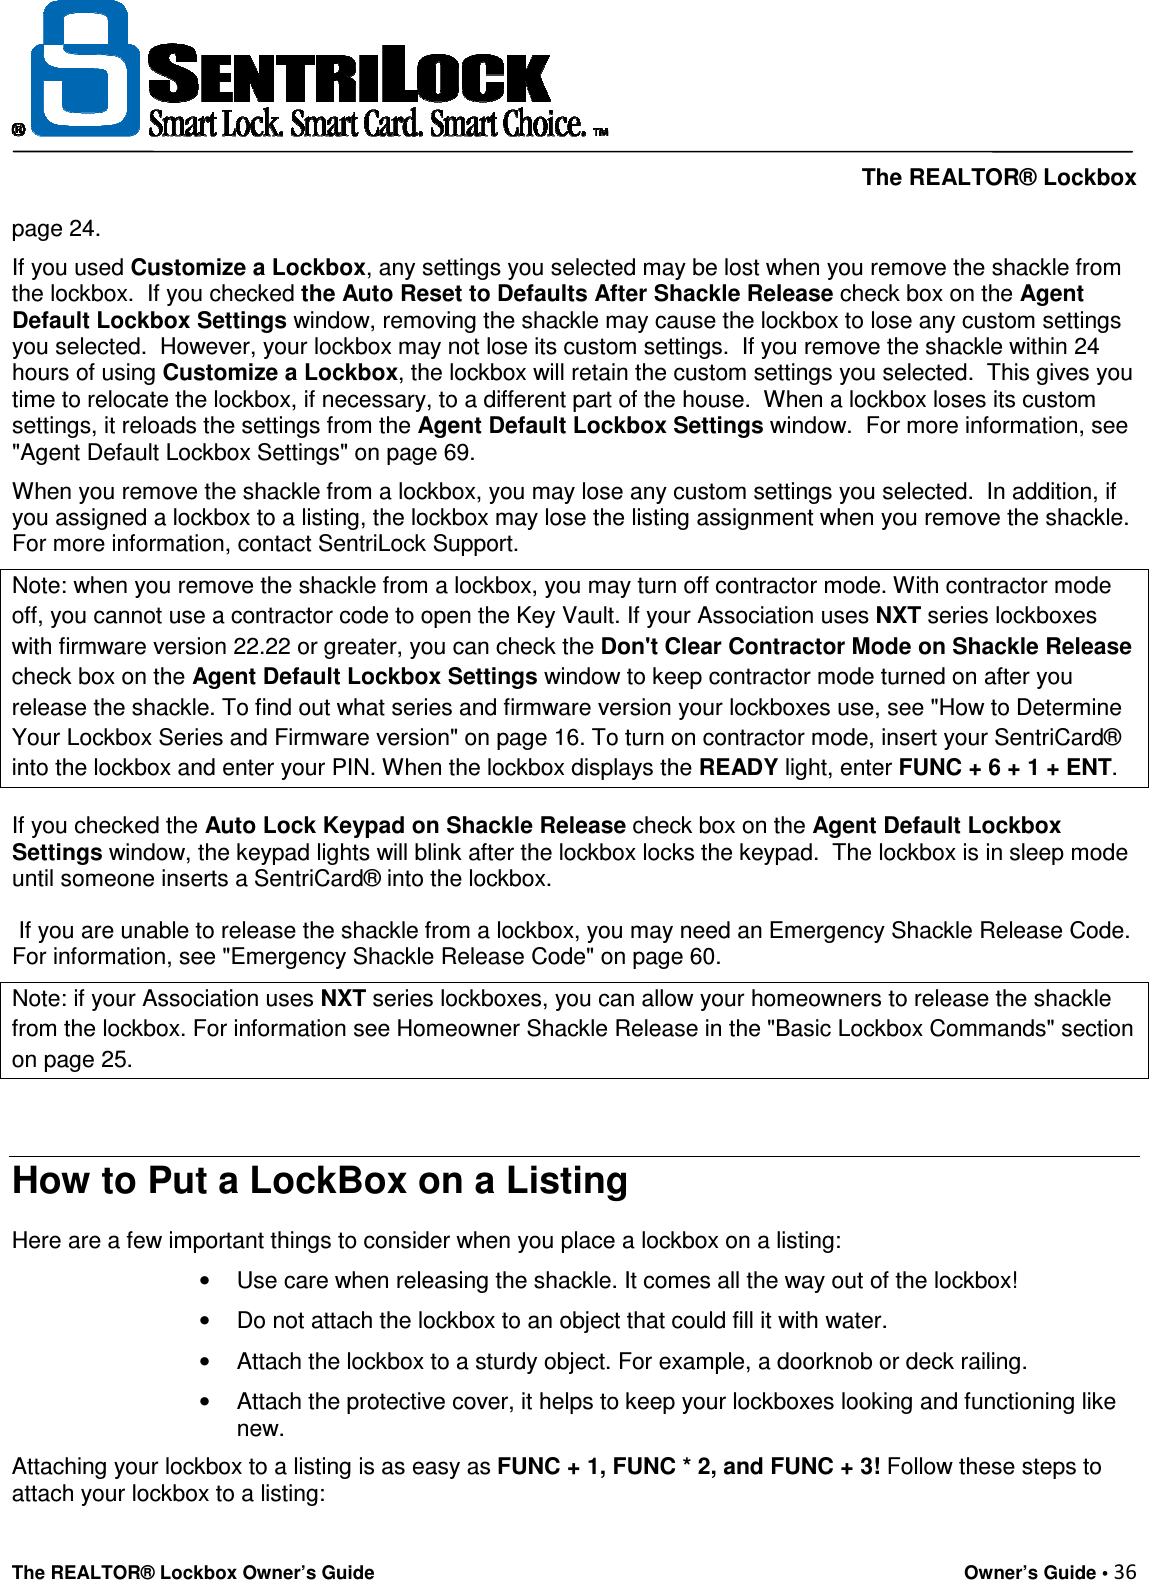     The REALTOR® Lockbox The REALTOR® Lockbox Owner’s Guide    Owner’s Guide • 36  page 24.  If you used Customize a Lockbox, any settings you selected may be lost when you remove the shackle from the lockbox.  If you checked the Auto Reset to Defaults After Shackle Release check box on the Agent Default Lockbox Settings window, removing the shackle may cause the lockbox to lose any custom settings you selected.  However, your lockbox may not lose its custom settings.  If you remove the shackle within 24 hours of using Customize a Lockbox, the lockbox will retain the custom settings you selected.  This gives you time to relocate the lockbox, if necessary, to a different part of the house.  When a lockbox loses its custom settings, it reloads the settings from the Agent Default Lockbox Settings window.  For more information, see &quot;Agent Default Lockbox Settings&quot; on page 69.  When you remove the shackle from a lockbox, you may lose any custom settings you selected.  In addition, if you assigned a lockbox to a listing, the lockbox may lose the listing assignment when you remove the shackle. For more information, contact SentriLock Support. Note: when you remove the shackle from a lockbox, you may turn off contractor mode. With contractor mode off, you cannot use a contractor code to open the Key Vault. If your Association uses NXT series lockboxes with firmware version 22.22 or greater, you can check the Don&apos;t Clear Contractor Mode on Shackle Release check box on the Agent Default Lockbox Settings window to keep contractor mode turned on after you release the shackle. To find out what series and firmware version your lockboxes use, see &quot;How to Determine Your Lockbox Series and Firmware version&quot; on page 16. To turn on contractor mode, insert your SentriCard® into the lockbox and enter your PIN. When the lockbox displays the READY light, enter FUNC + 6 + 1 + ENT. If you checked the Auto Lock Keypad on Shackle Release check box on the Agent Default Lockbox Settings window, the keypad lights will blink after the lockbox locks the keypad.  The lockbox is in sleep mode until someone inserts a SentriCard® into the lockbox.  If you are unable to release the shackle from a lockbox, you may need an Emergency Shackle Release Code.  For information, see &quot;Emergency Shackle Release Code&quot; on page 60. Note: if your Association uses NXT series lockboxes, you can allow your homeowners to release the shackle from the lockbox. For information see Homeowner Shackle Release in the &quot;Basic Lockbox Commands&quot; section on page 25.  How to Put a LockBox on a Listing Here are a few important things to consider when you place a lockbox on a listing:  •  Use care when releasing the shackle. It comes all the way out of the lockbox!  •  Do not attach the lockbox to an object that could fill it with water.  •  Attach the lockbox to a sturdy object. For example, a doorknob or deck railing.  •  Attach the protective cover, it helps to keep your lockboxes looking and functioning like new. Attaching your lockbox to a listing is as easy as FUNC + 1, FUNC * 2, and FUNC + 3! Follow these steps to attach your lockbox to a listing:  